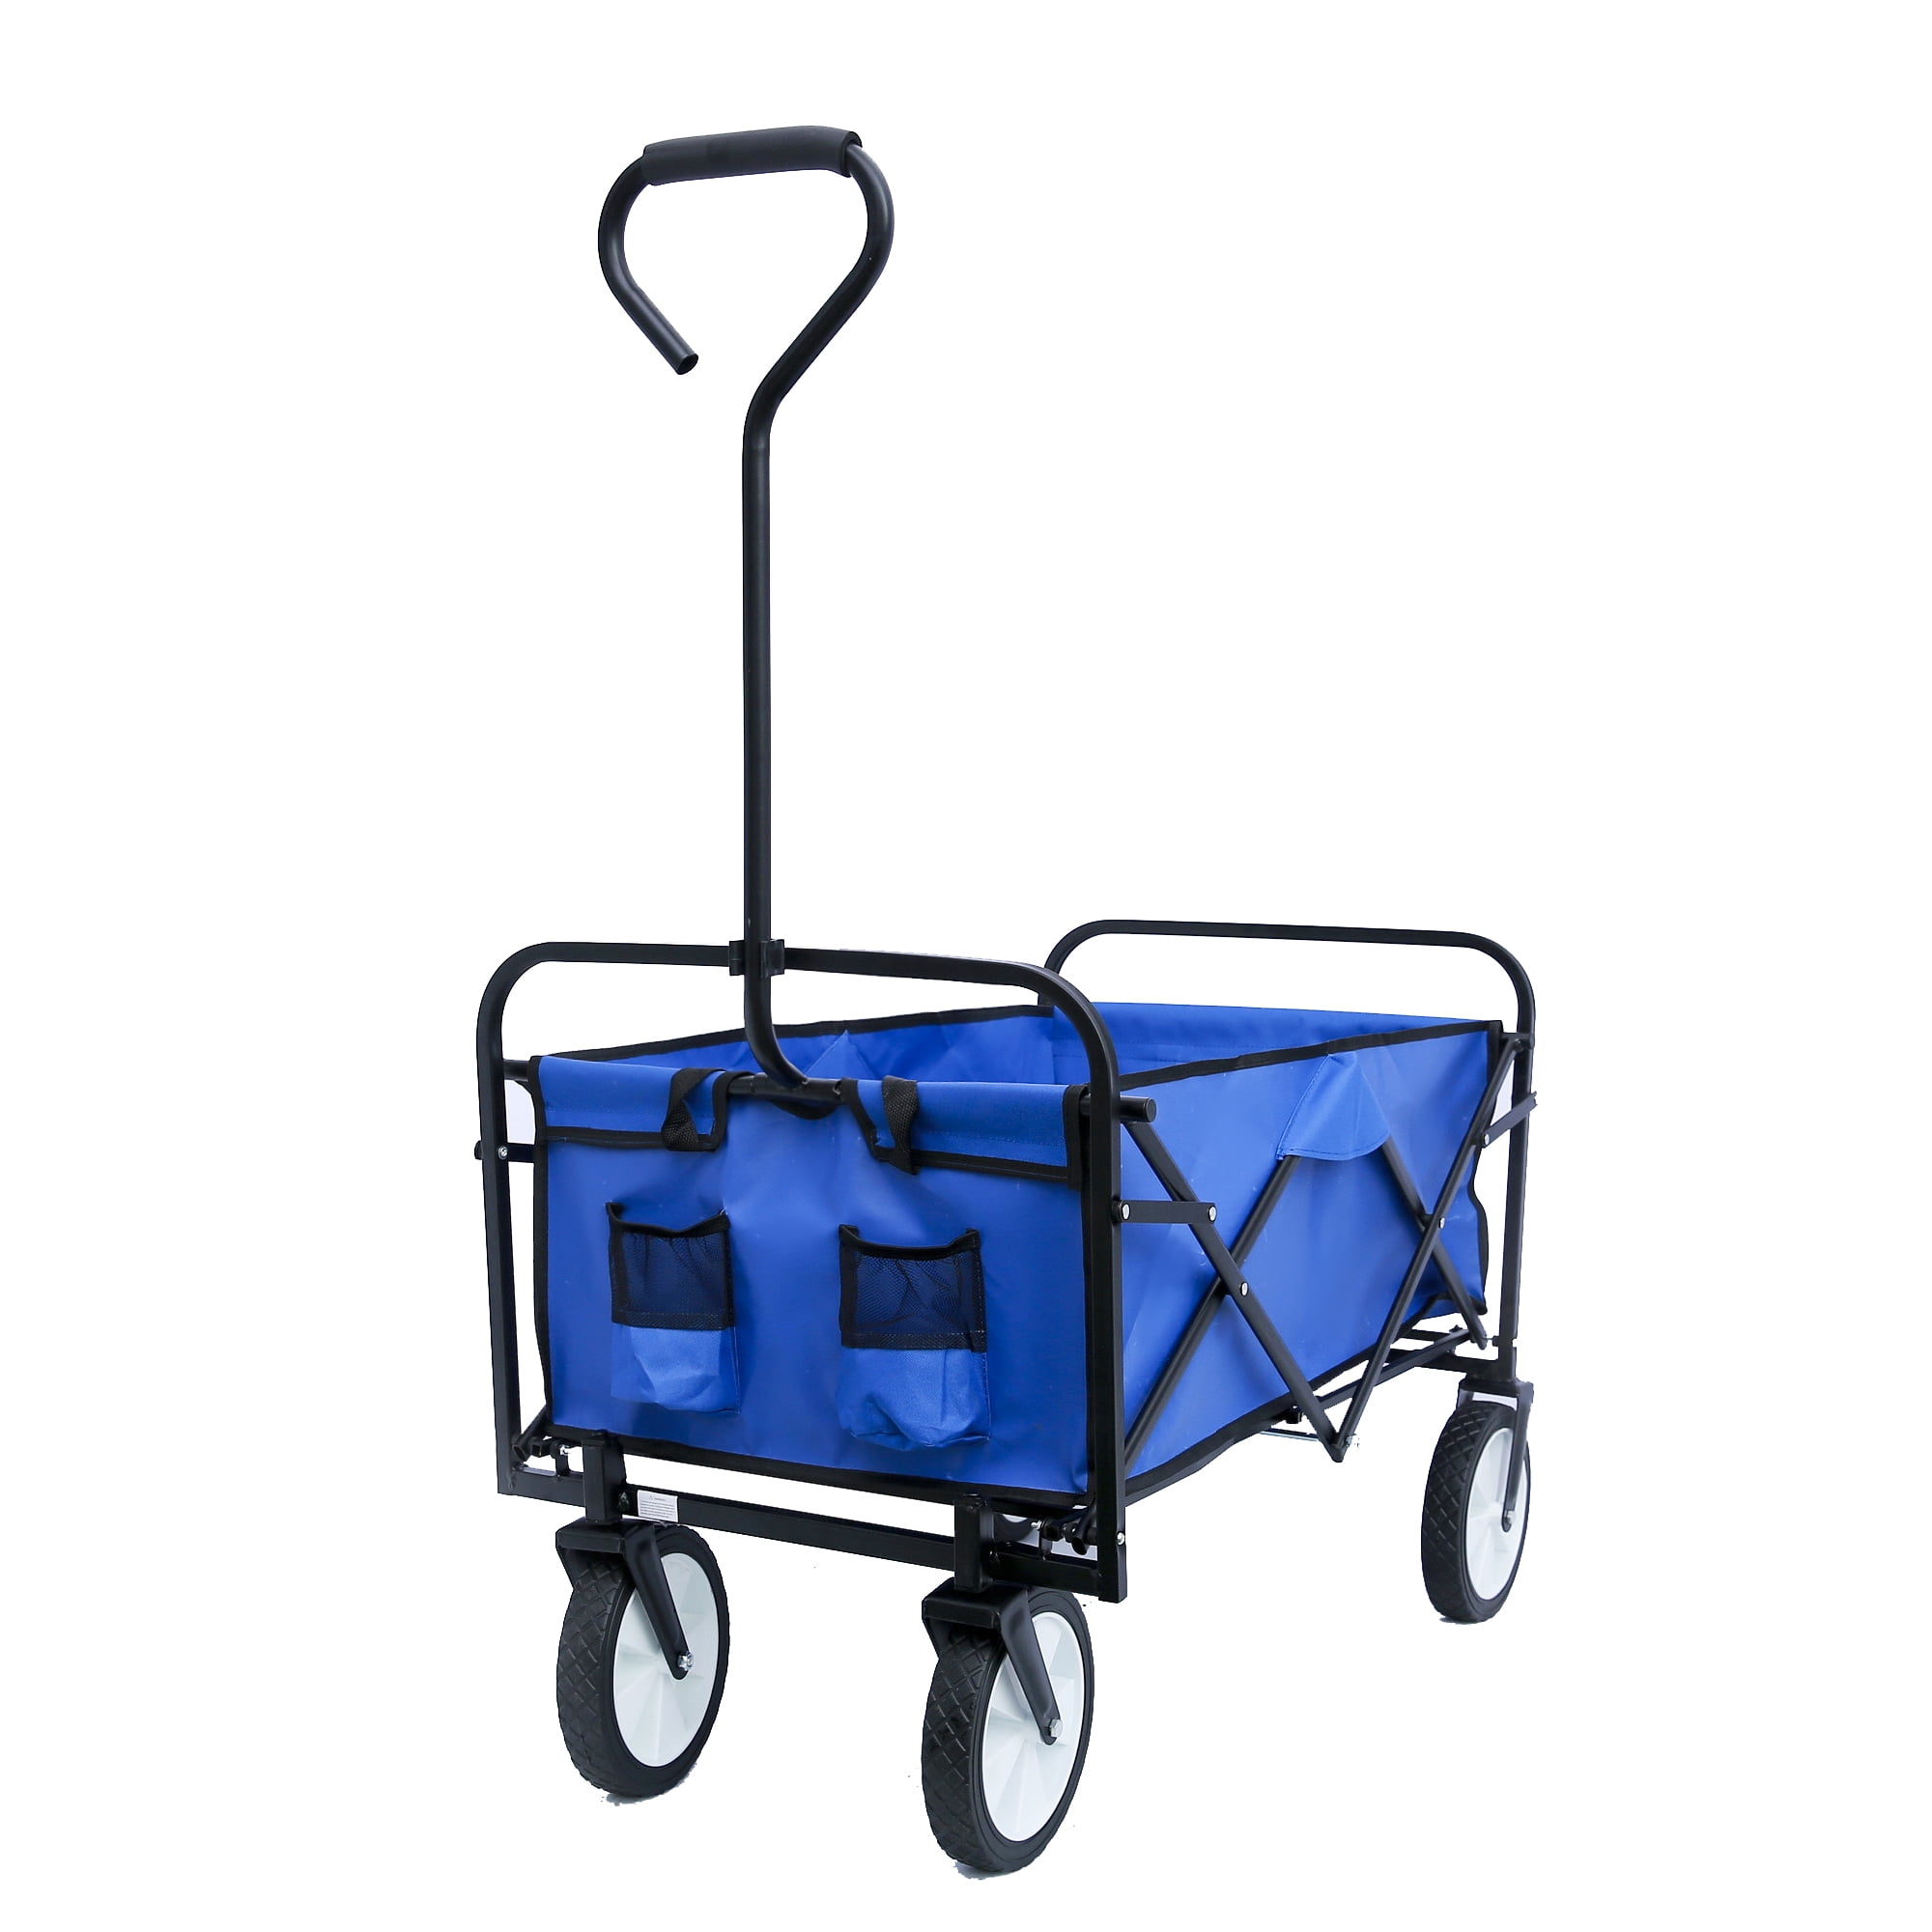 Beach Trip and Camping Collapsible Outdoor Wagon Stroller with Wheels,Garden Portable Hand Cart with Wheels,Wagon Stroller for Shopping and Park Picnic Blue